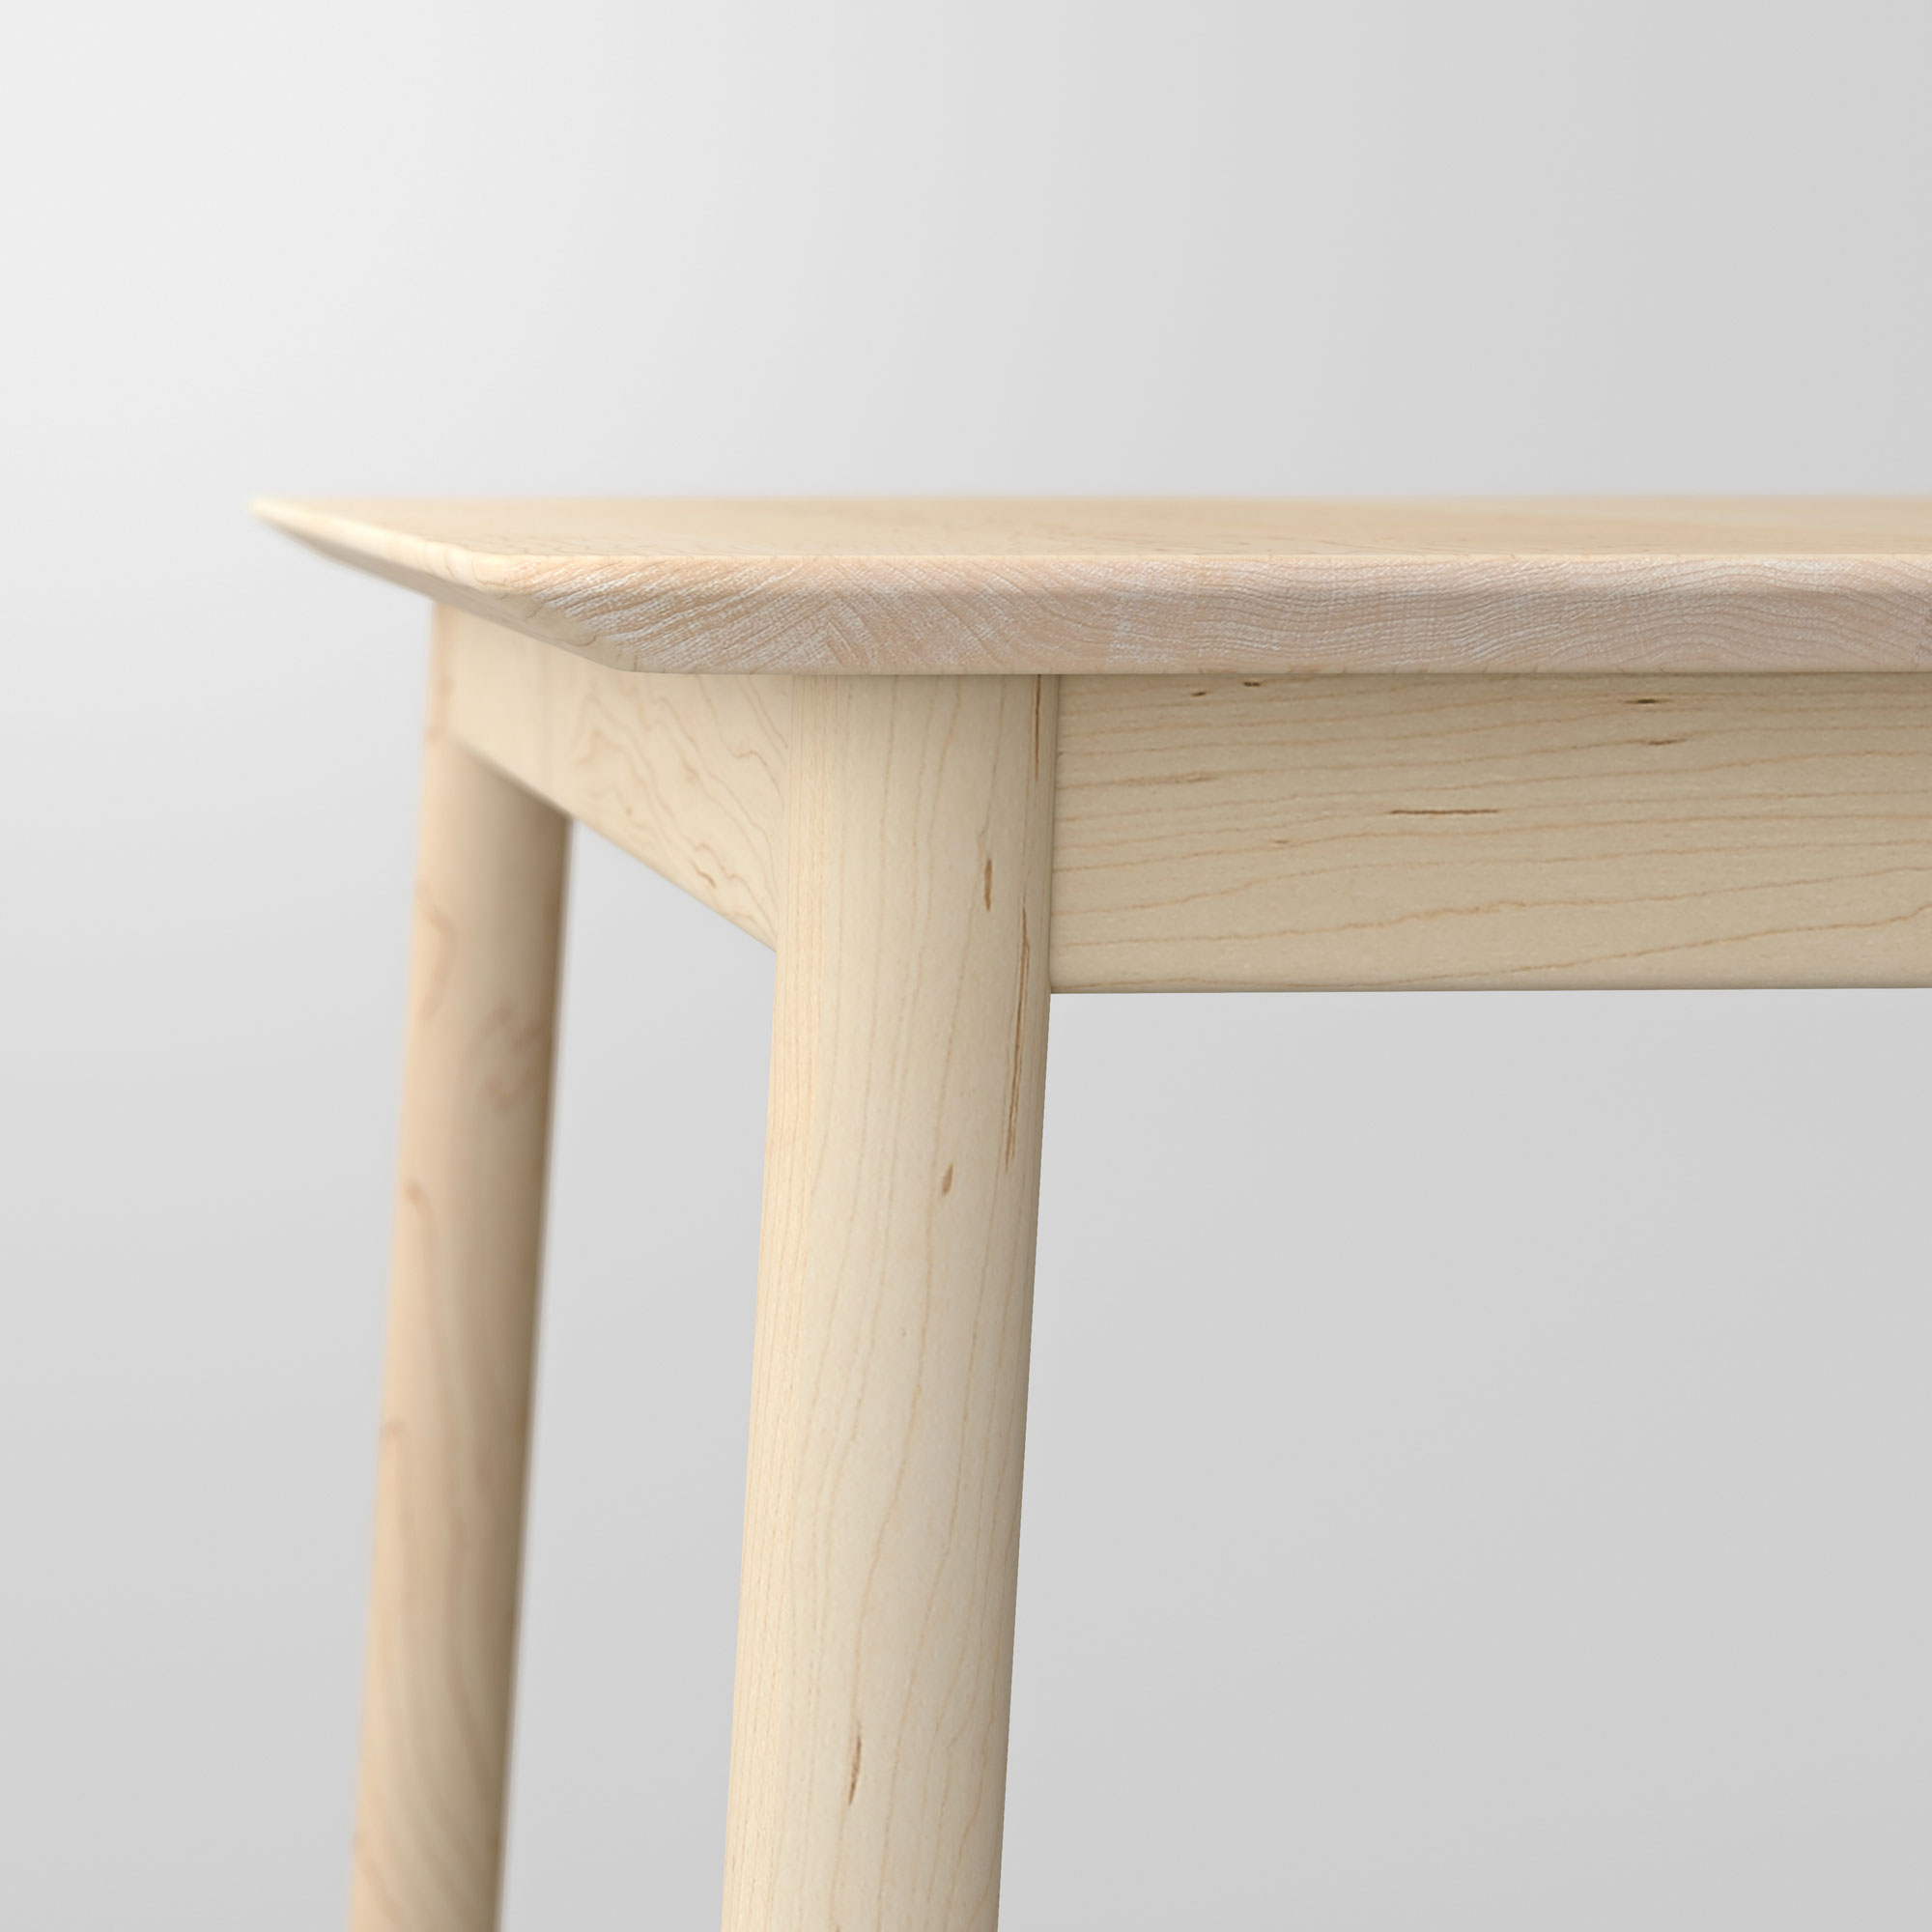 Style Wood Table LOCA cam4 custom made in solid wood by vitamin design